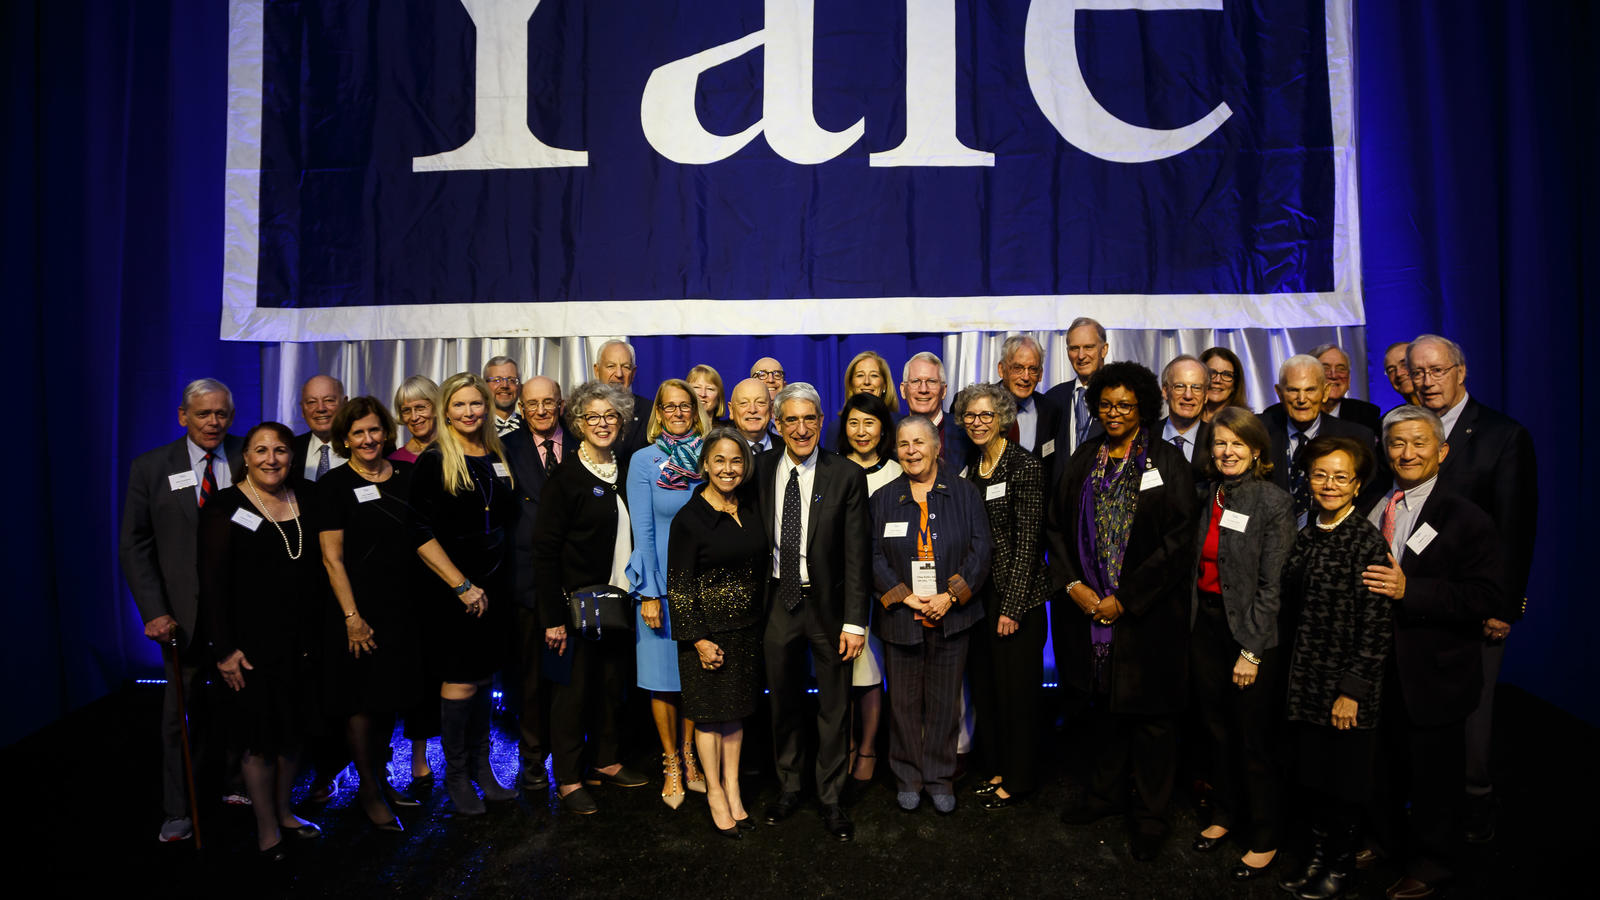 All Yale medalists in attendance at the 2019 Assembly and Convocation gather for a group photo.